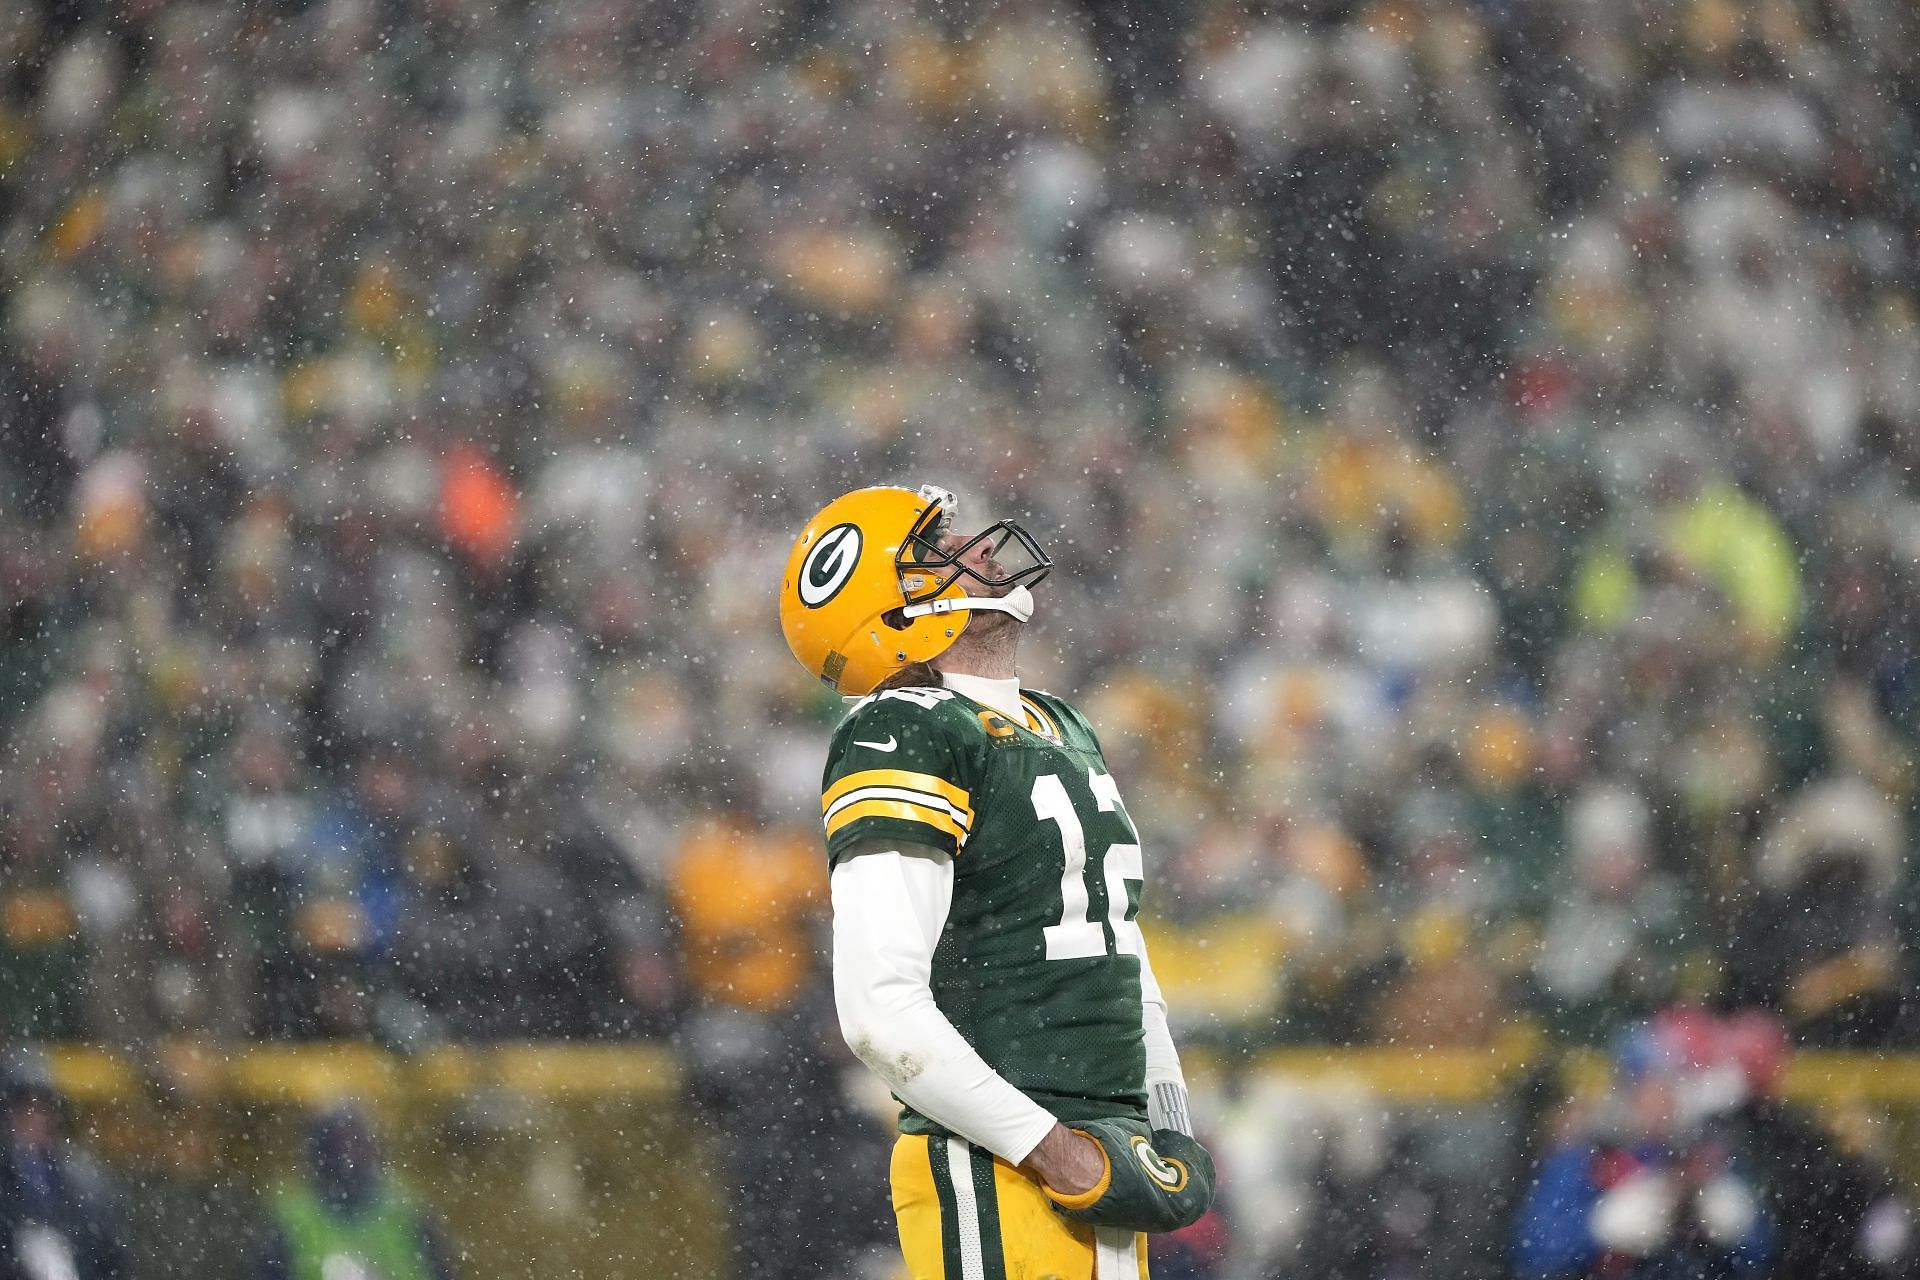 Aaron Rodgers looks skyward during the 4th quarter of the NFC Divisional Playoff game